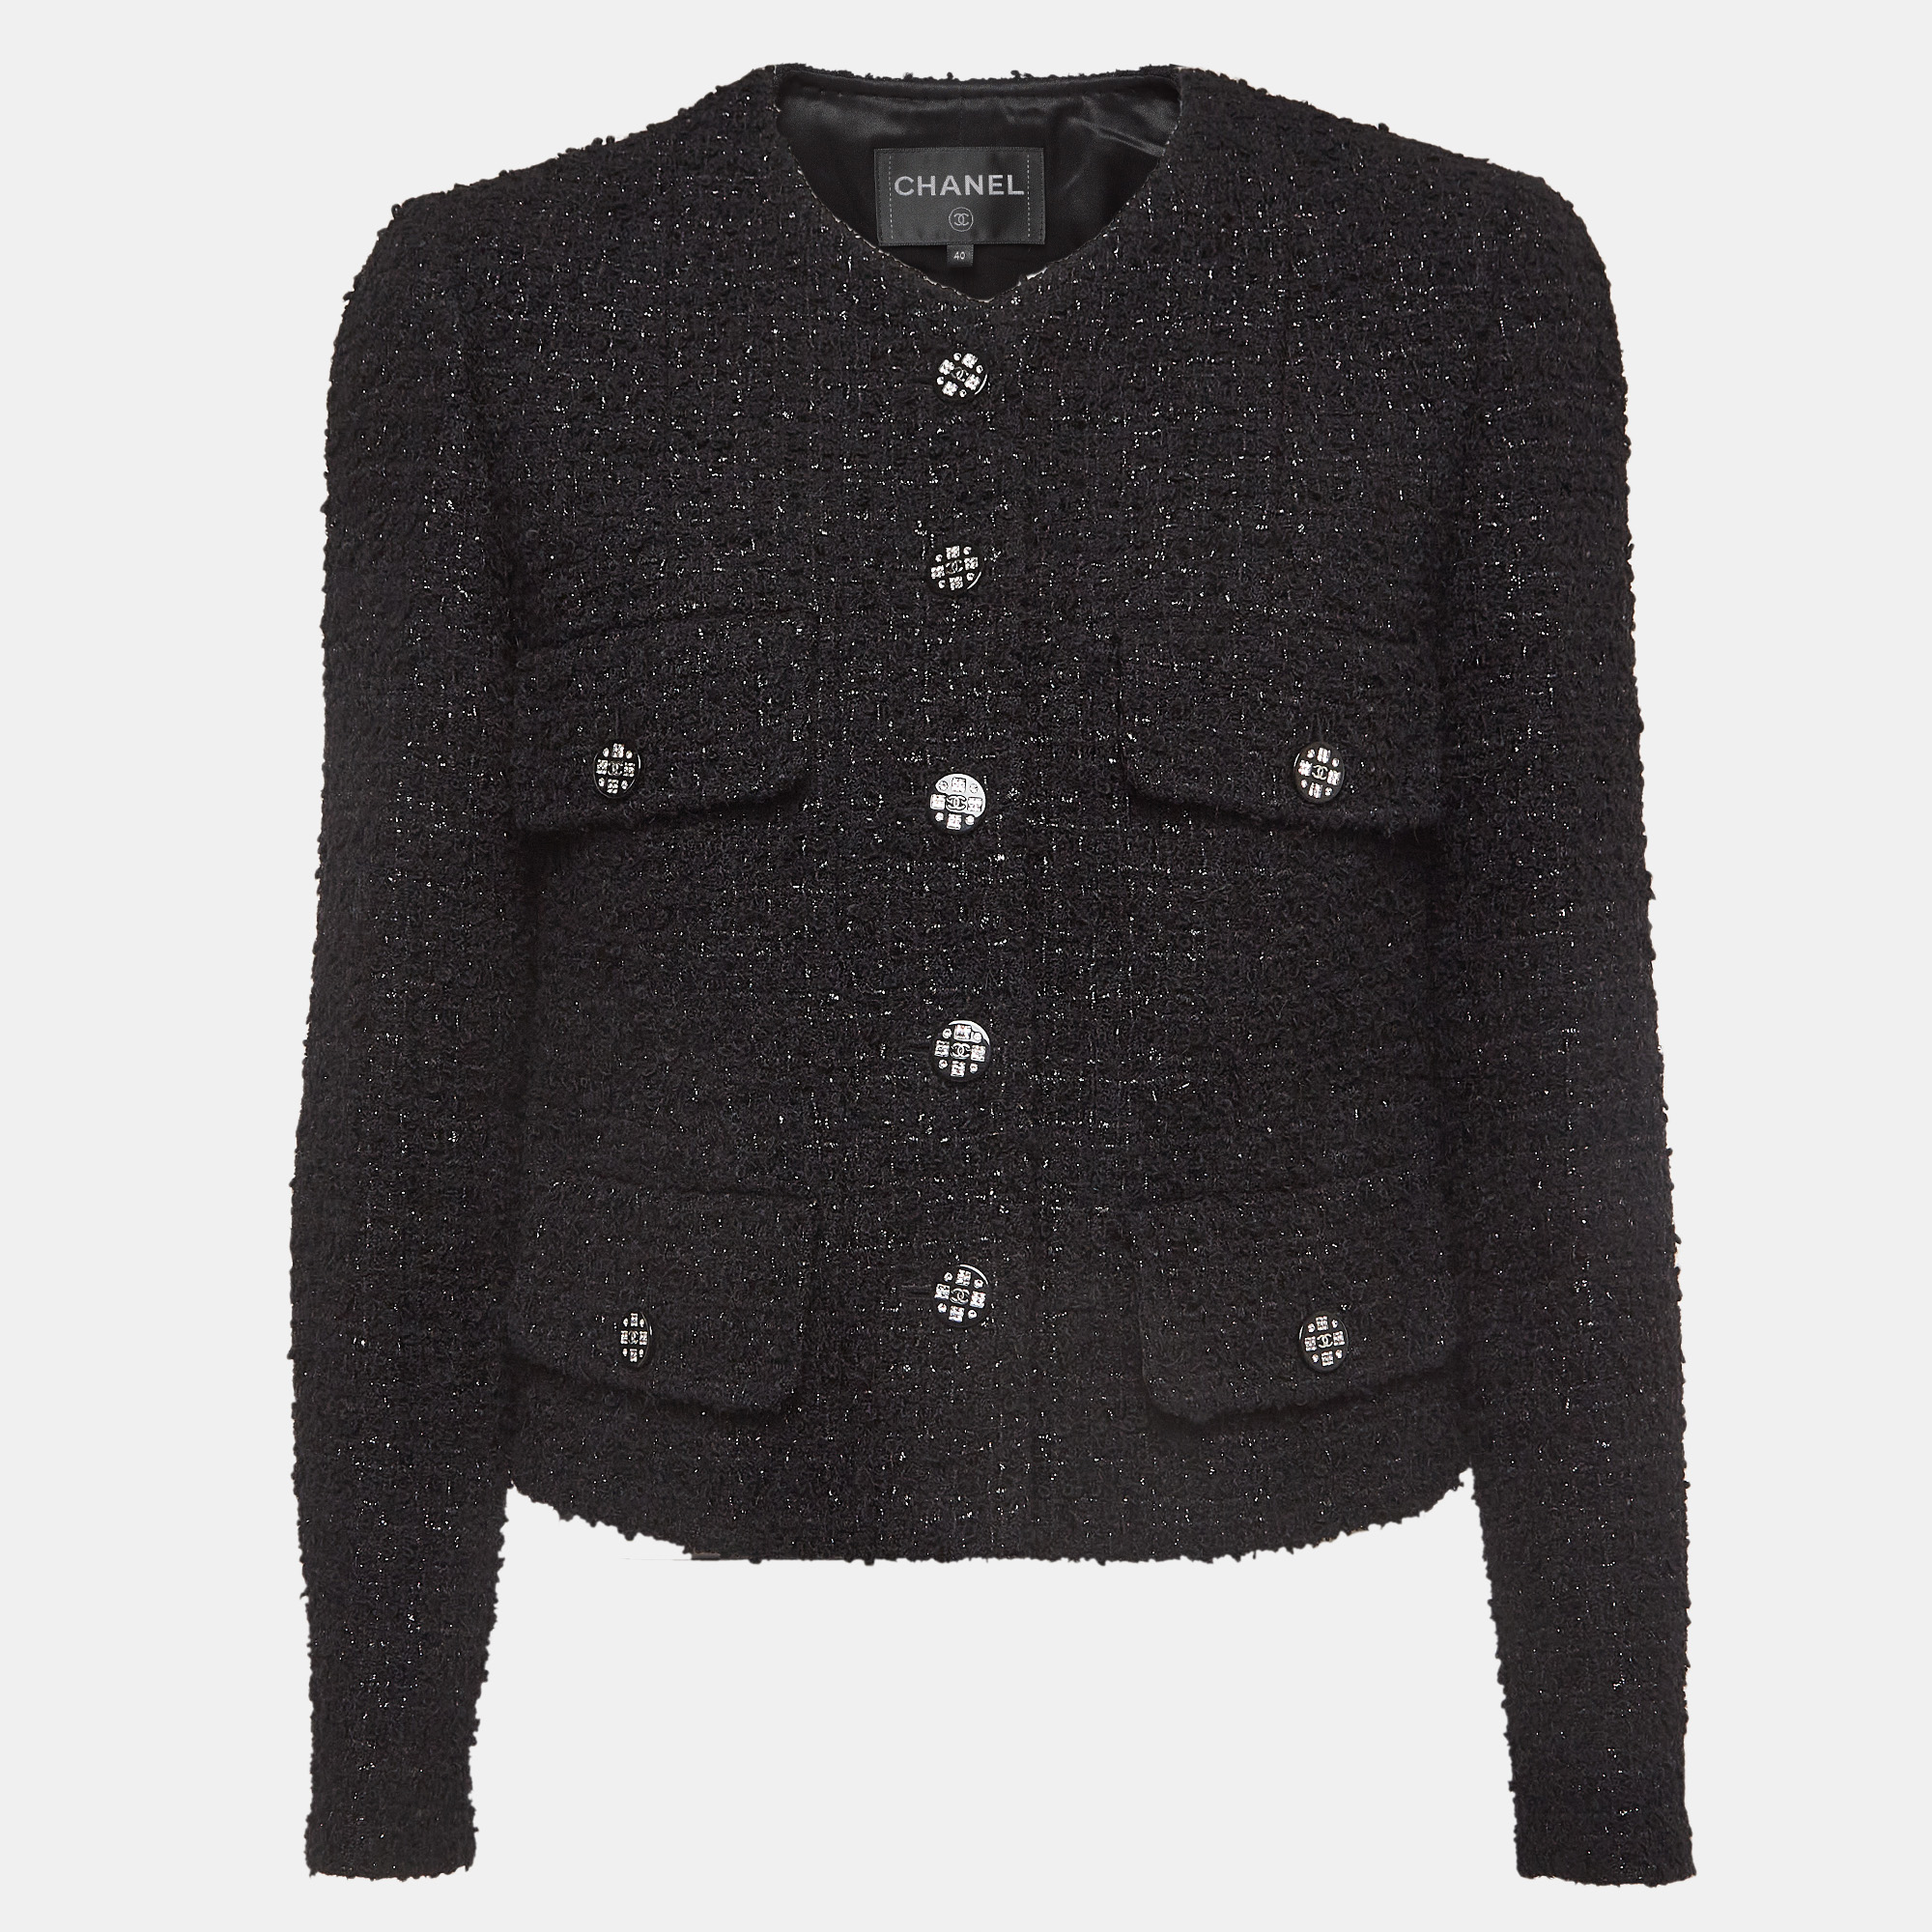 Chanel black tweed buttoned jacket m